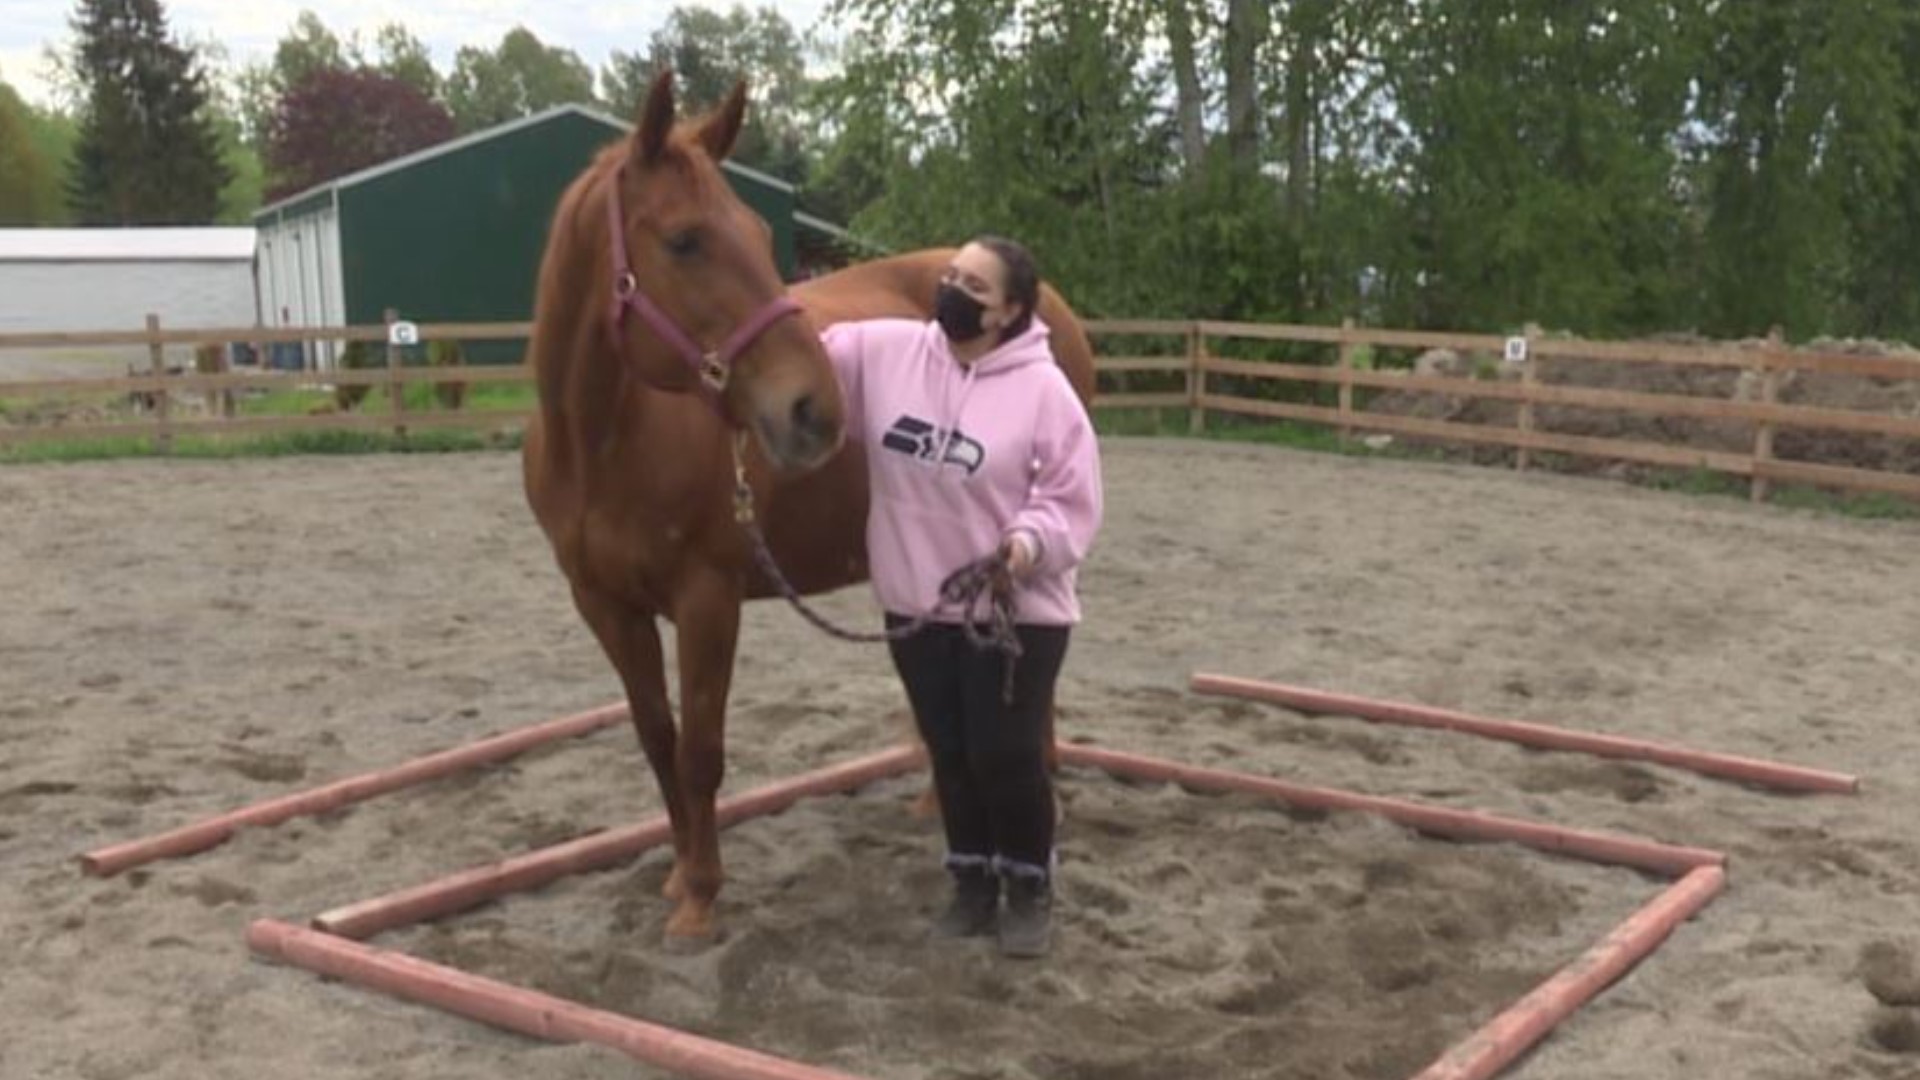 Animals as Natural Therapy uses horses and mental health counselors to deliver mental and behavioral health programming. #k5evening